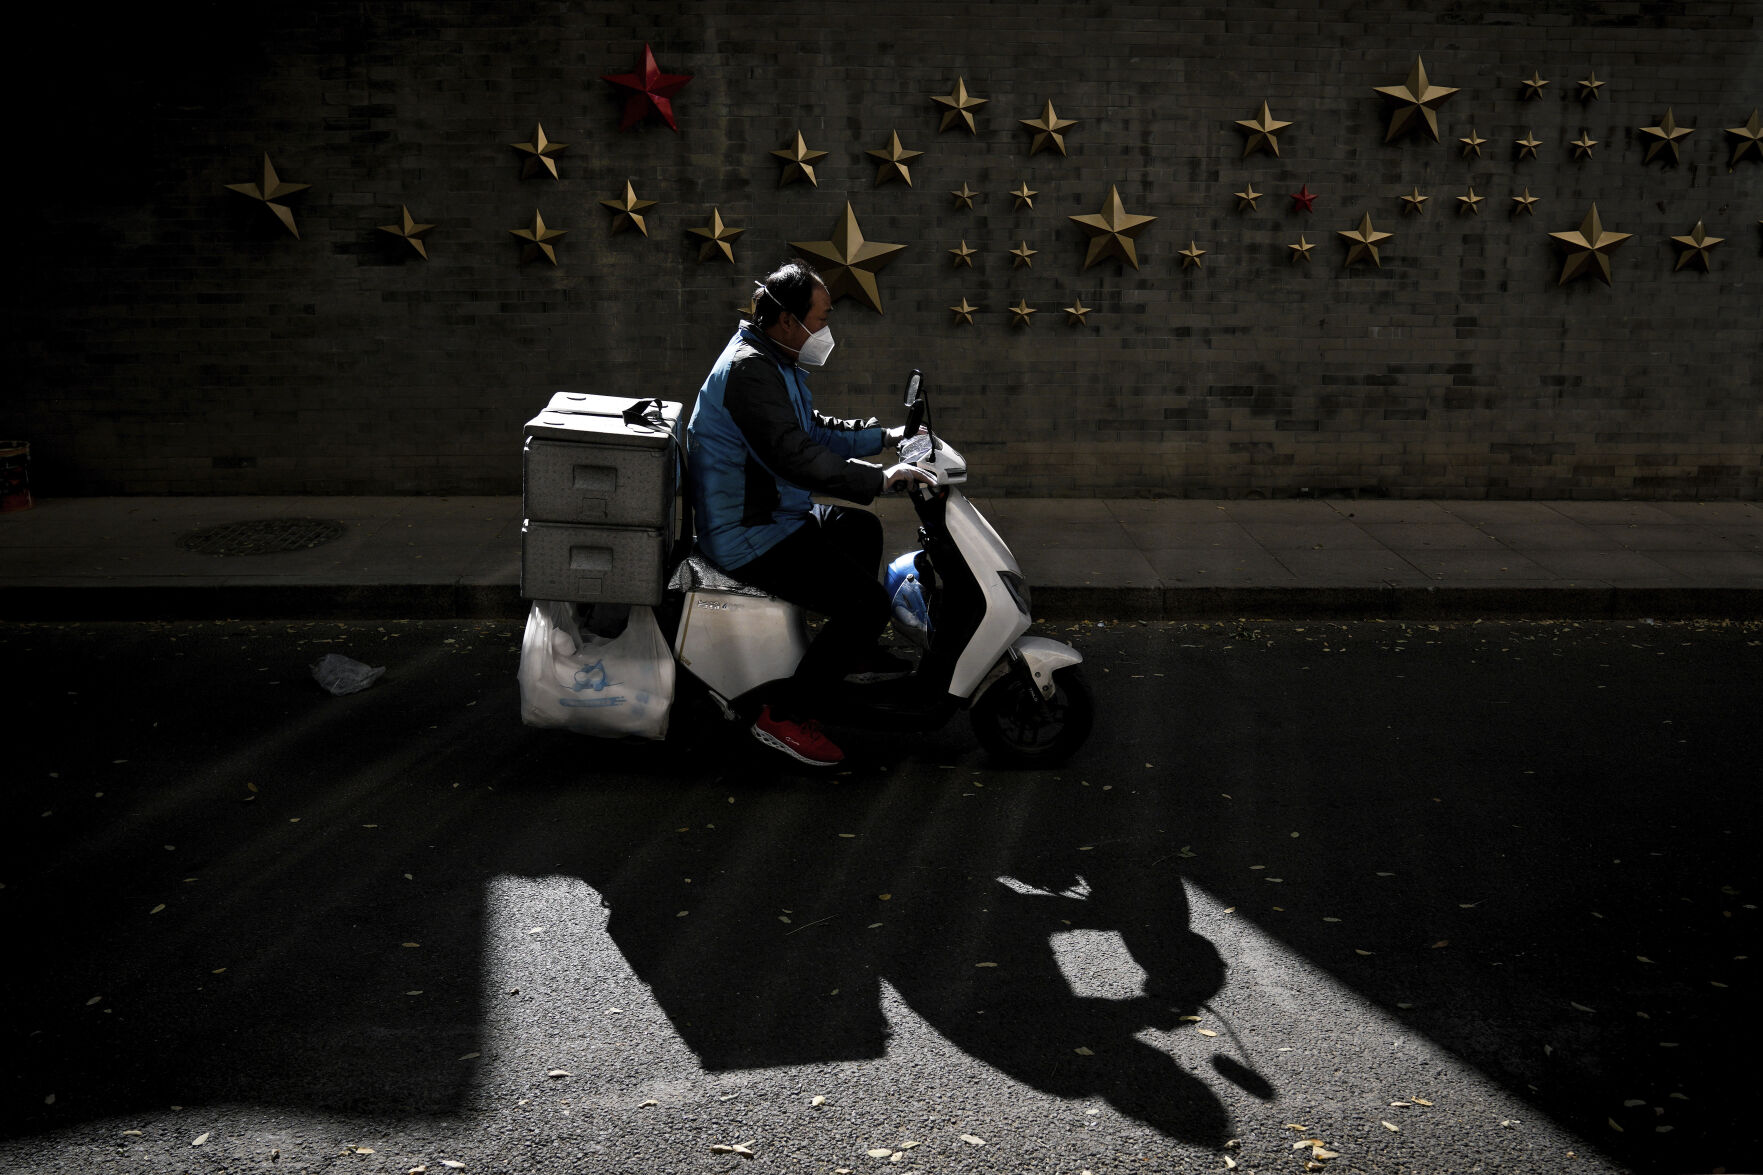 <p>A food delivery rider wearing a face mask rides past communist symbol of stars on display outside a restaurant in Beijing, Monday, Oct. 31, 2022. (AP Photo/Andy Wong)</p>   PHOTO CREDIT: Andy Wong - staff, AP